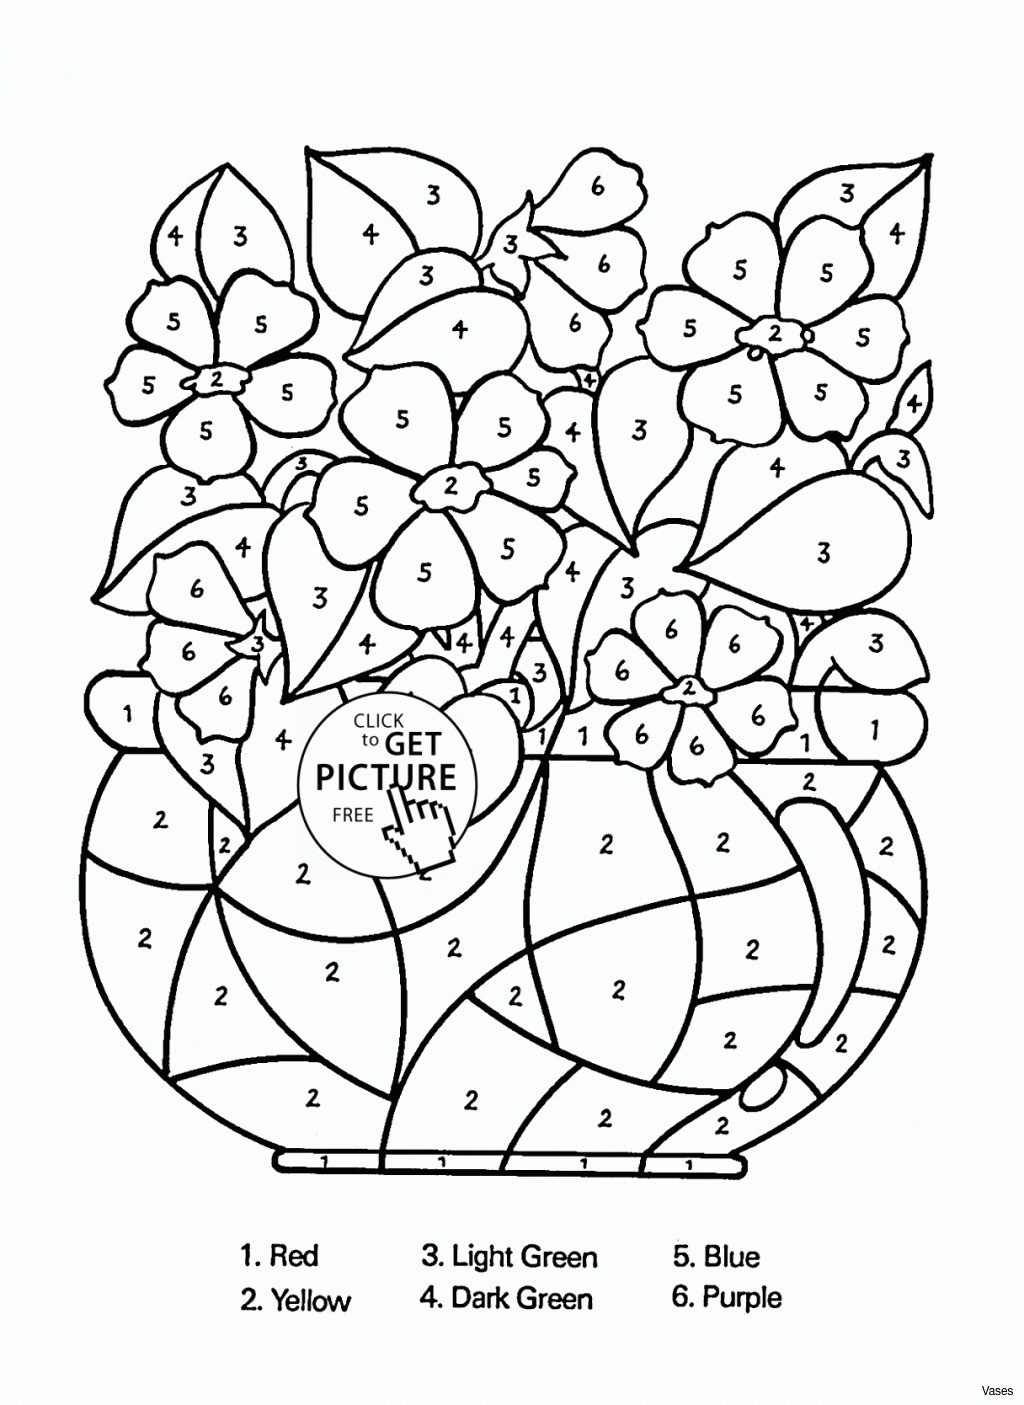 18 Ideal Fish In Vase 2024 free download fish in vase of coloring pages of flowers for kids new cool vases flower vase intended for coloring pages of flowers for kids coloring page for kids lovely cool vases flower vase coloring